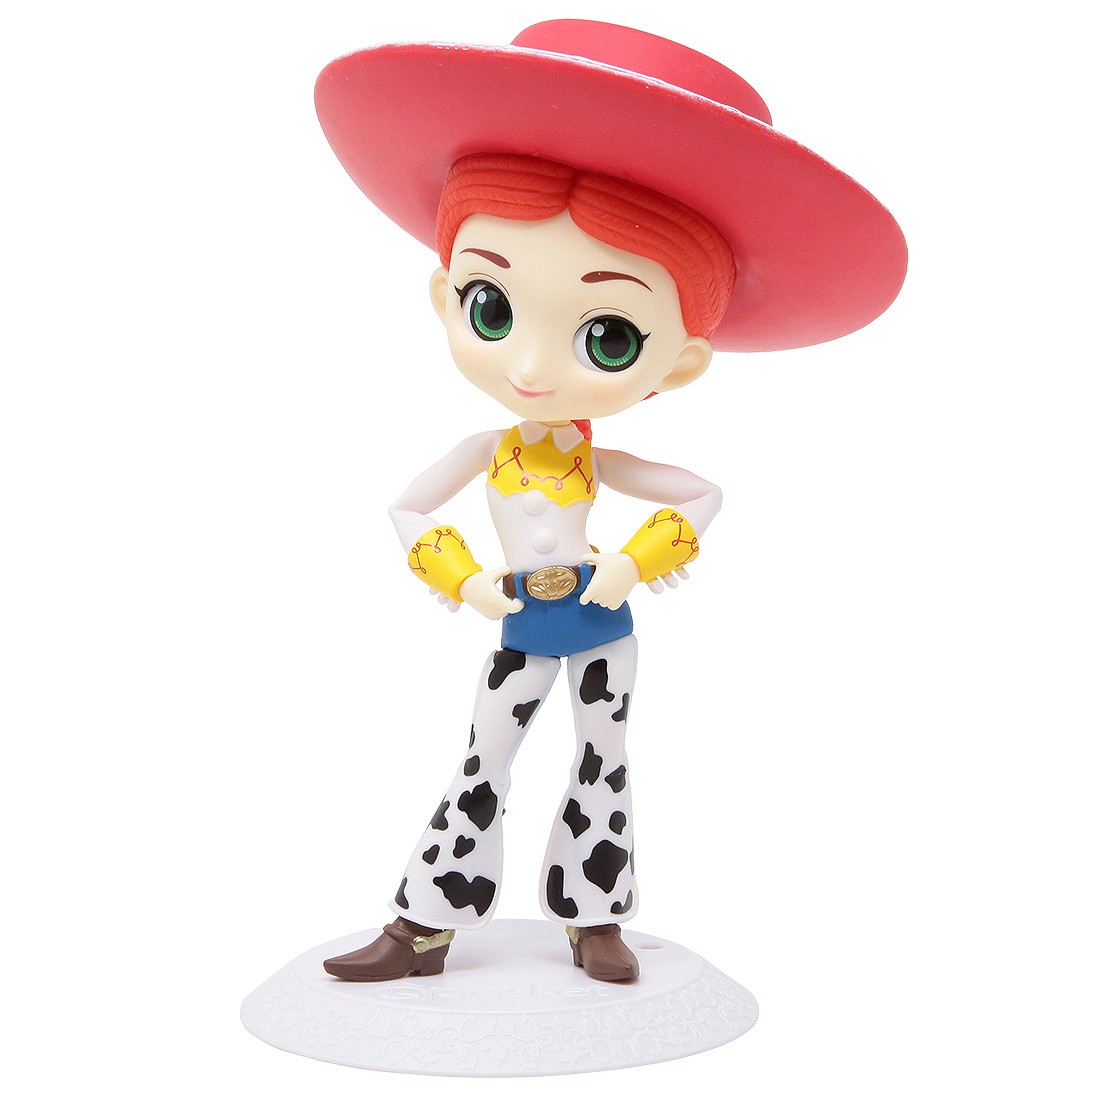 Qposket Details about   Q posket Disney Characters Normal Color Jessie Toy Story 